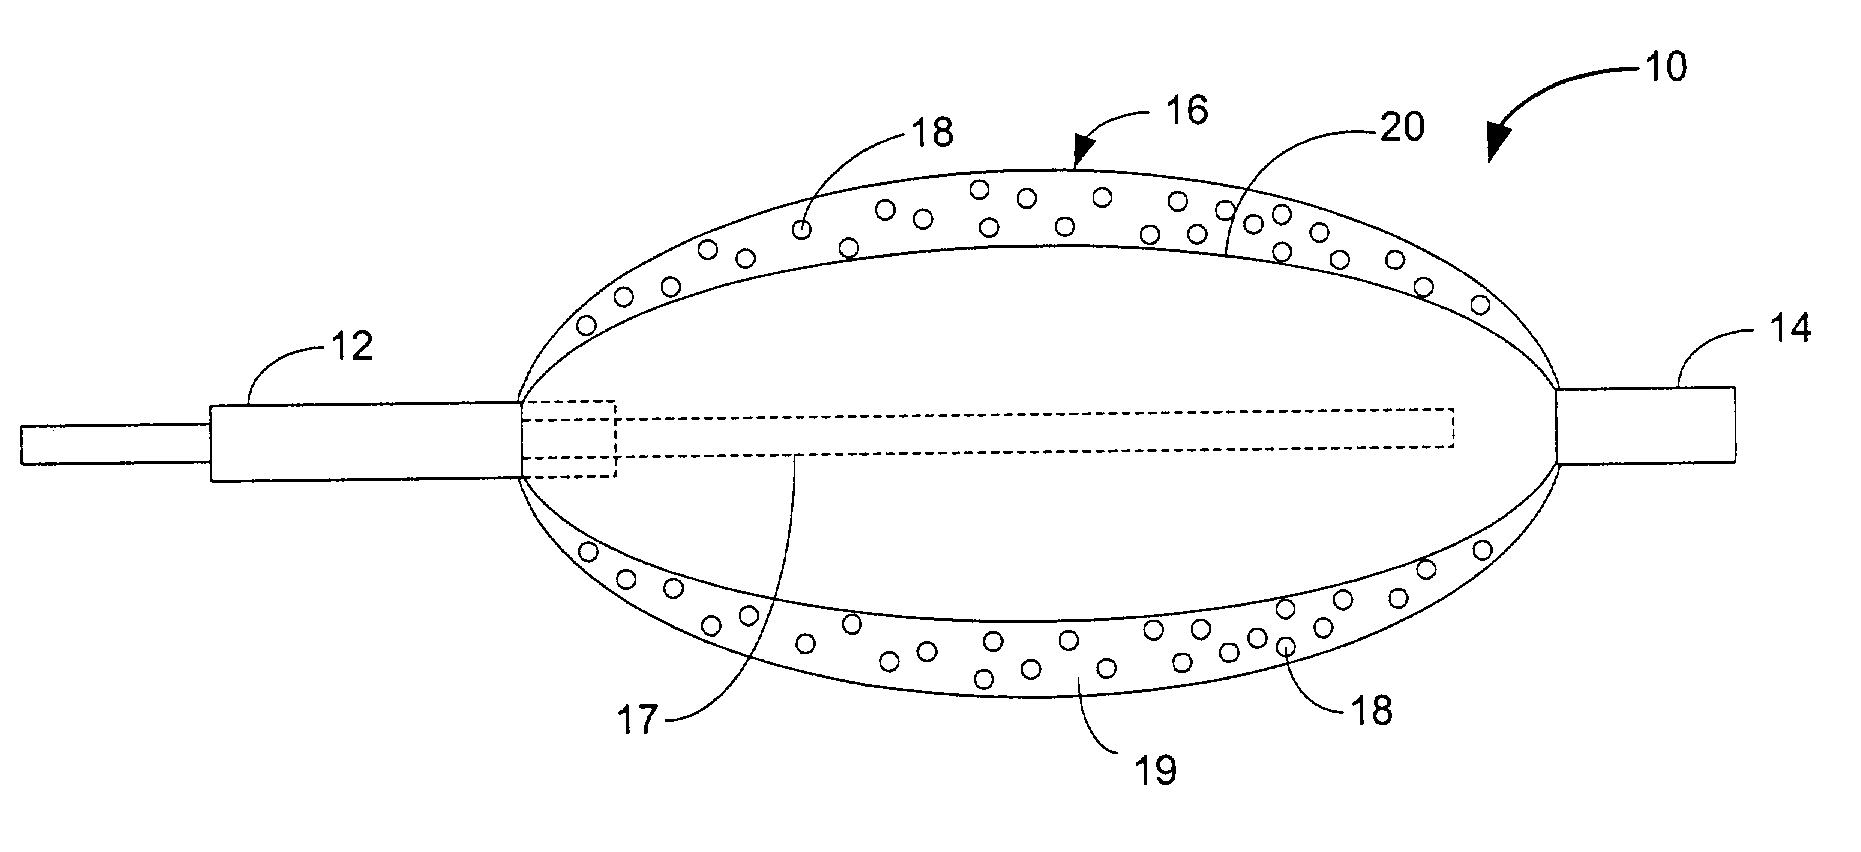 Drug eluting medical device with an expandable portion for drug release